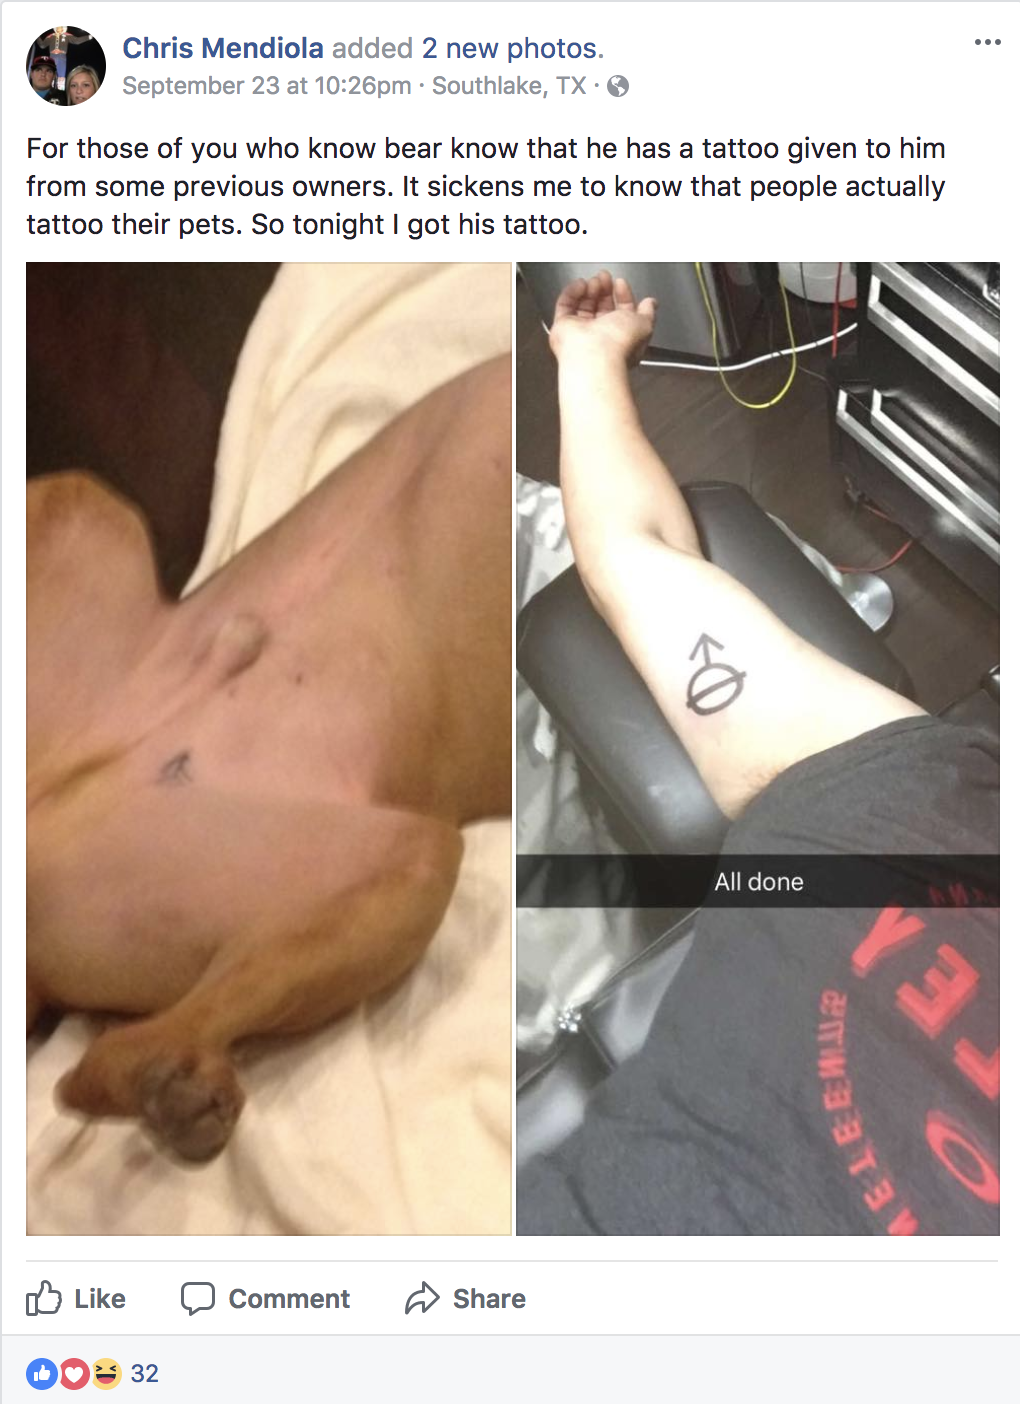 Man Who Got The Same Neuter Tattoo As His Dog Doesn’t Care About The Haters